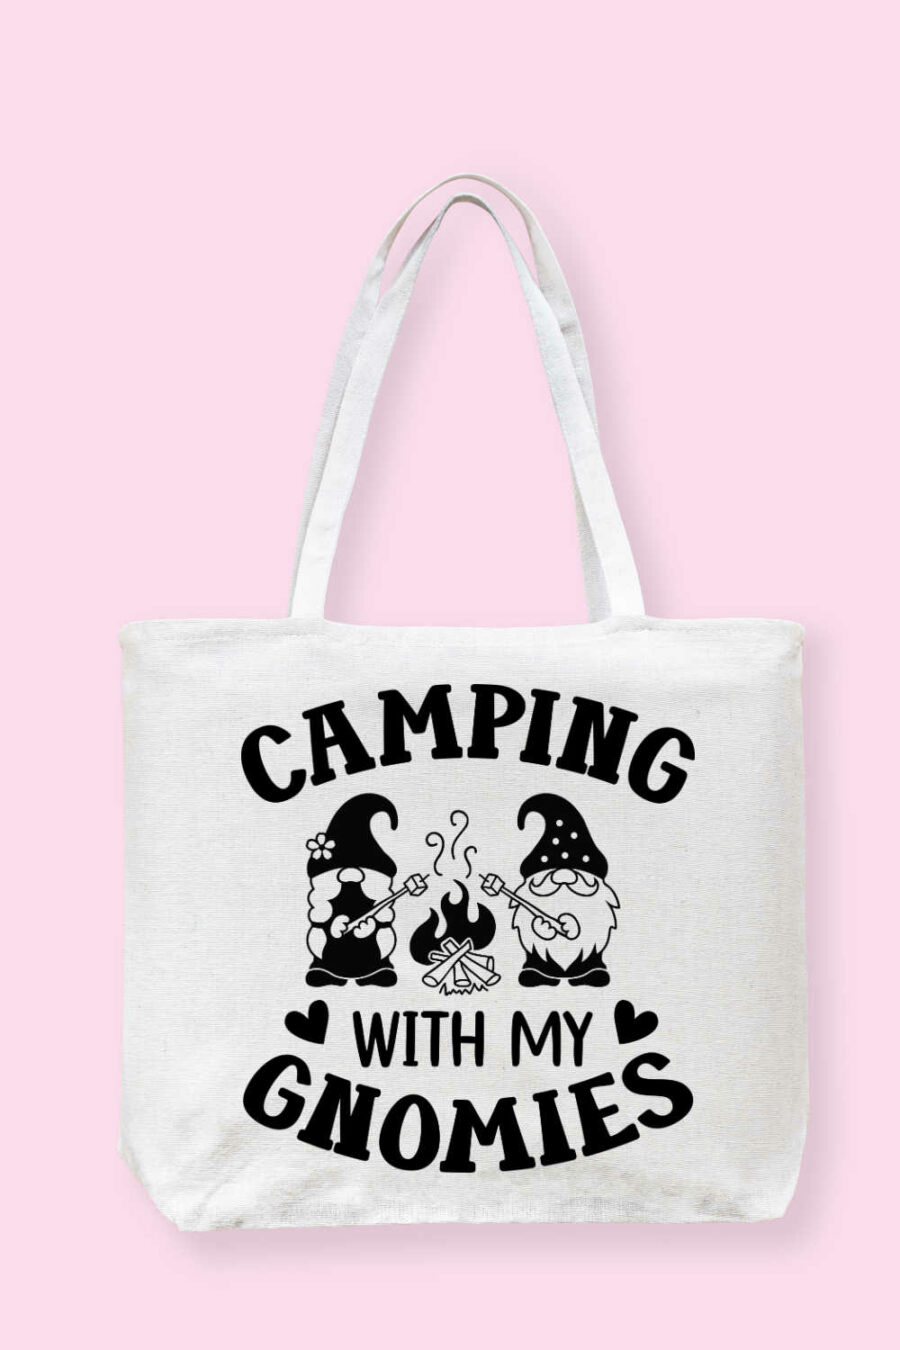 Camping with my Gnomies bag